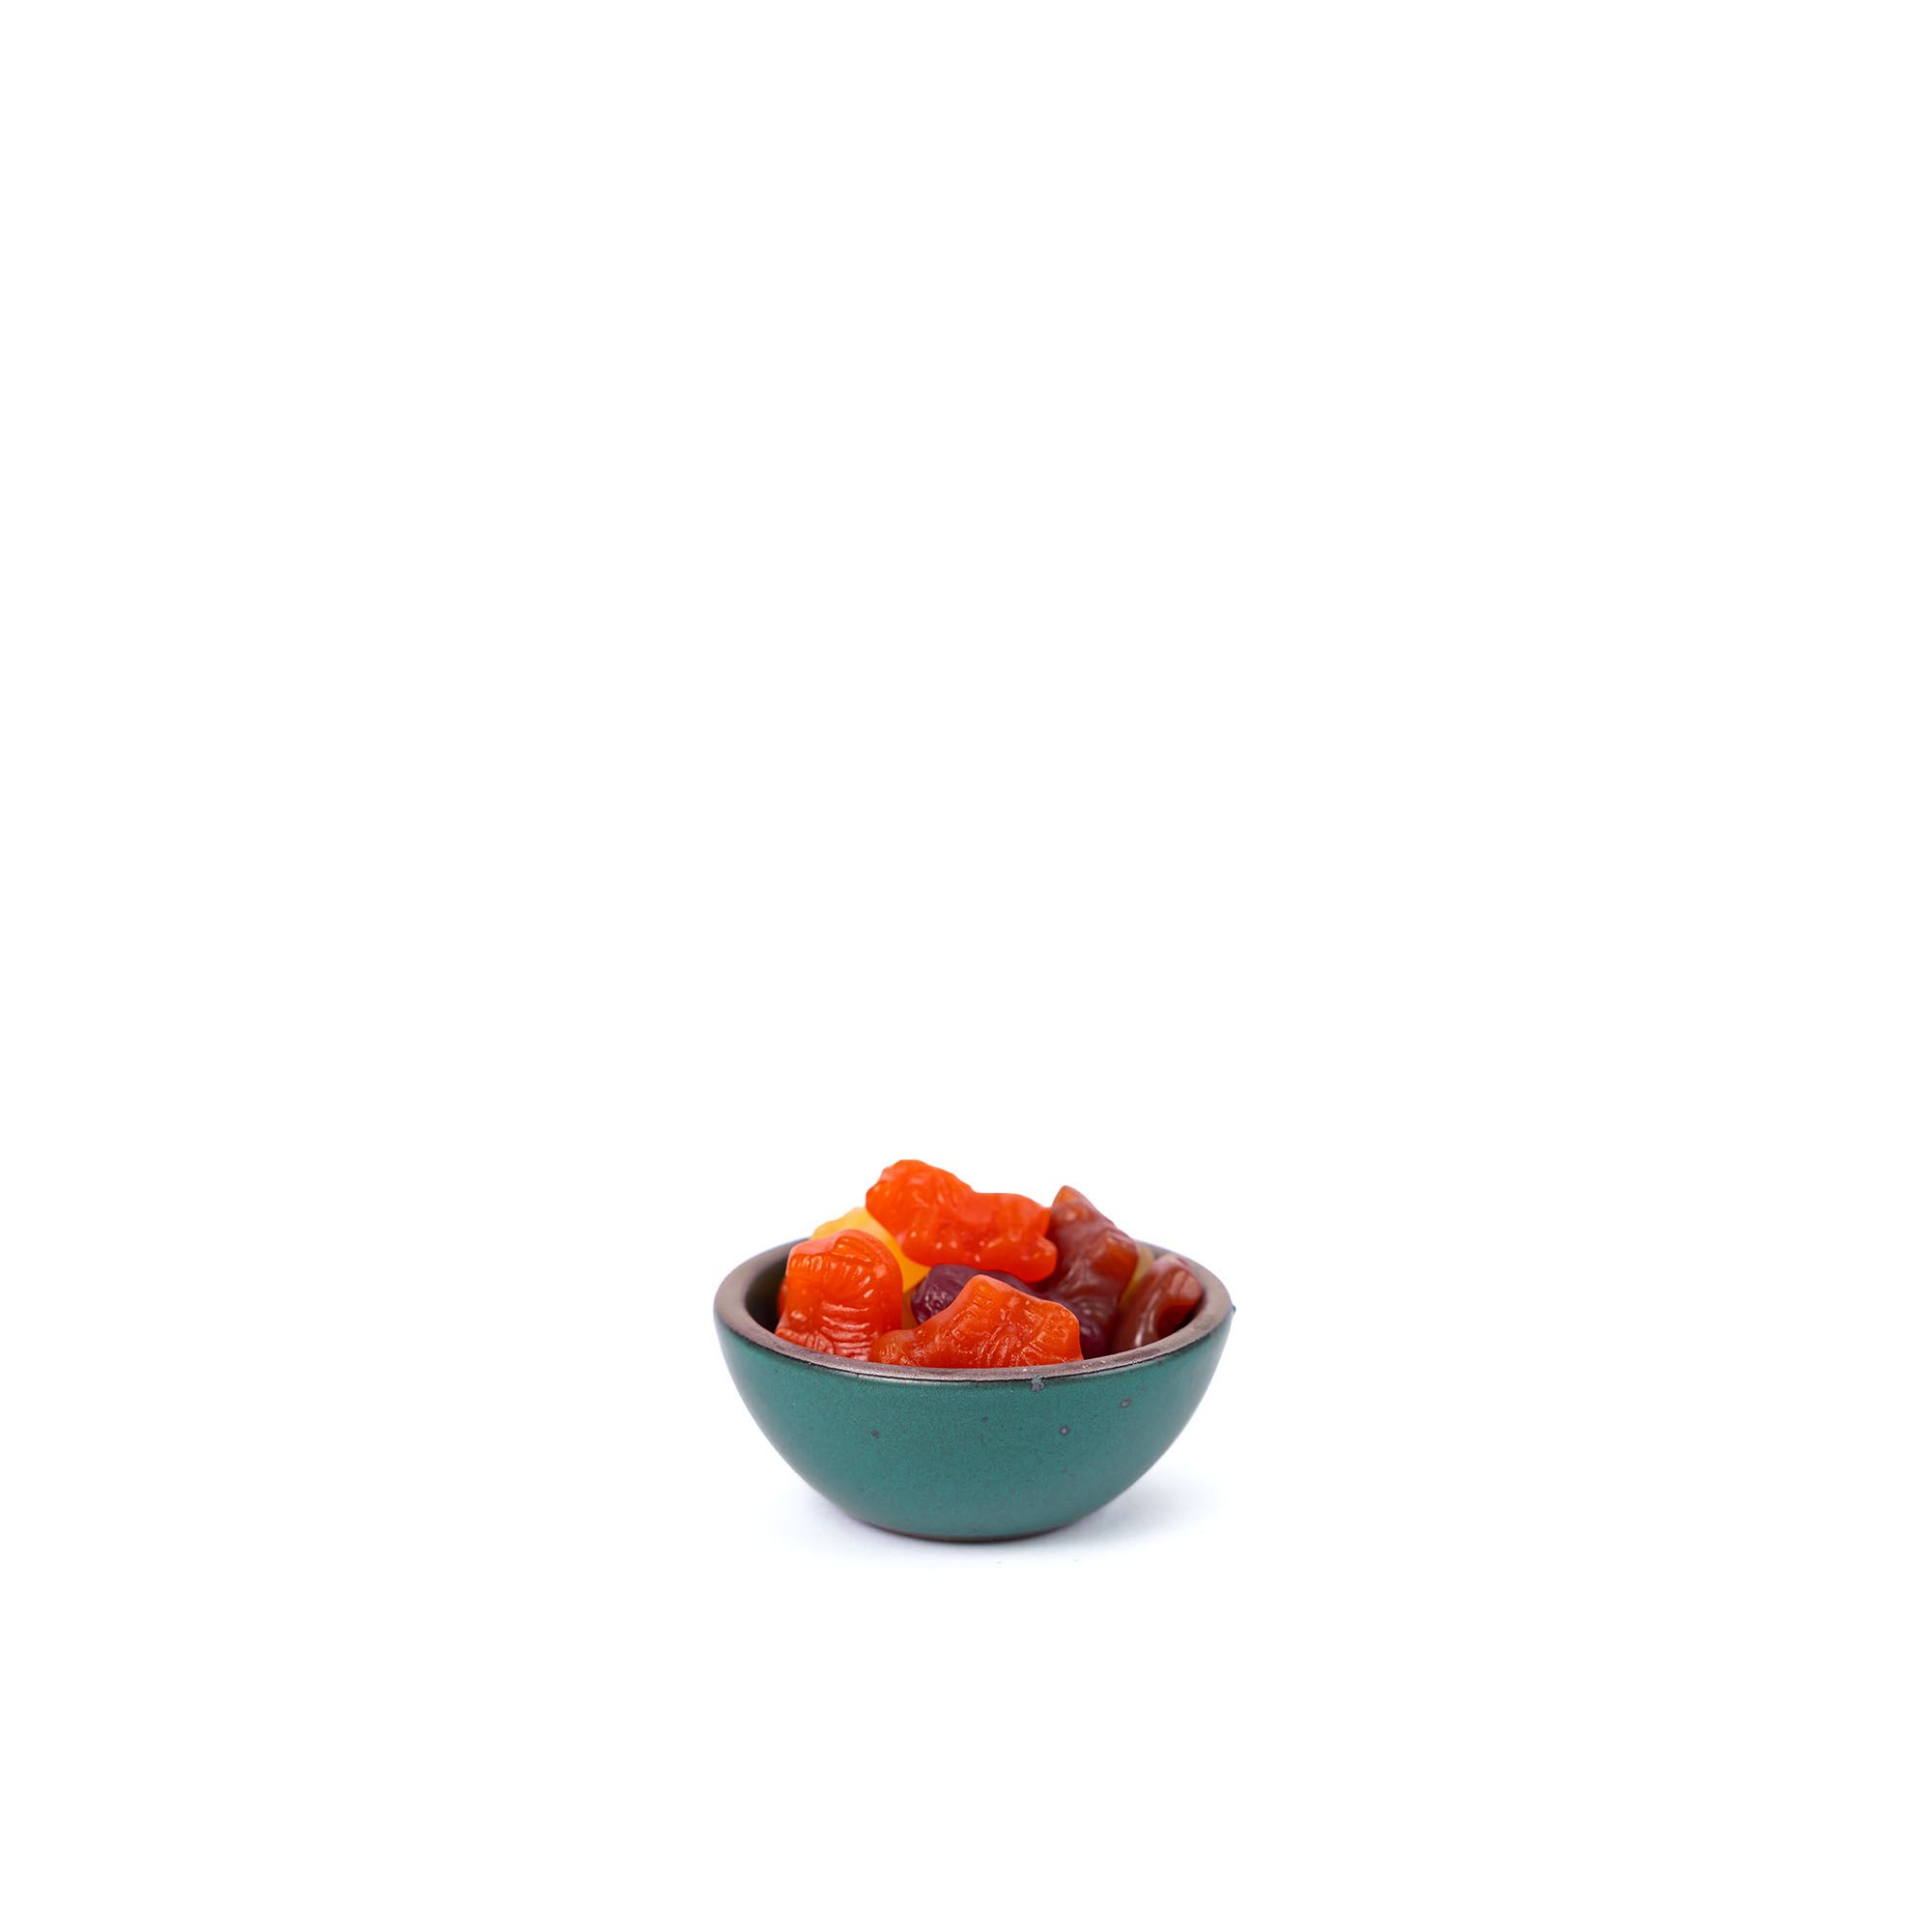 Candy in a tiny rounded ceramic bowl in a deep dark teal color featuring iron speckles and an unglazed rim